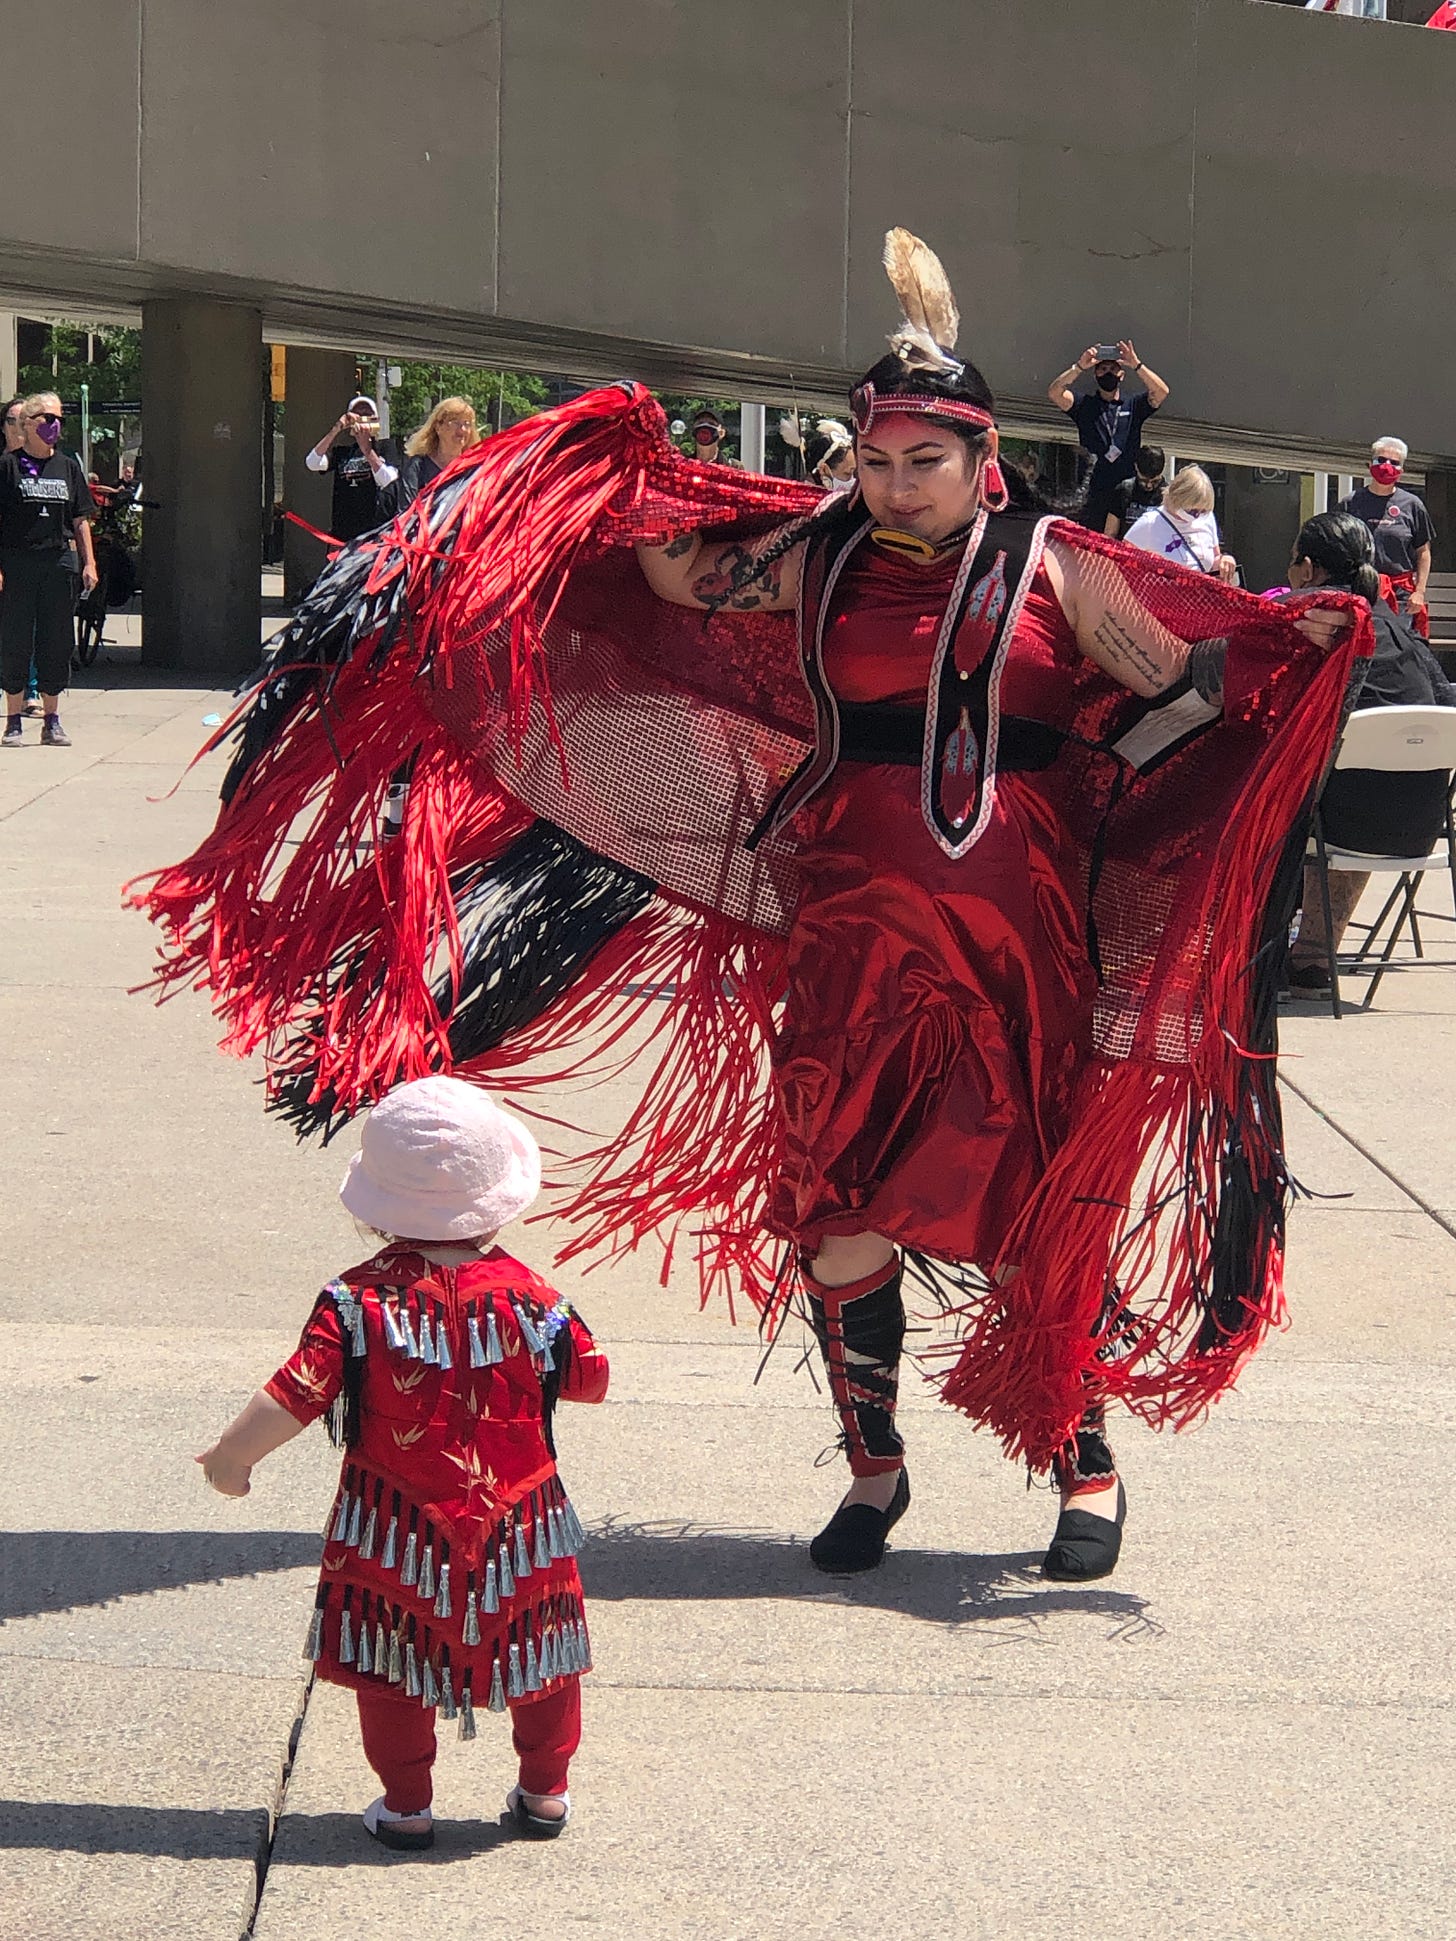 Dancer in Indigenous regalia is dancing beside a child, who is watching dancer. The child is also wearing Indigenous regalia.